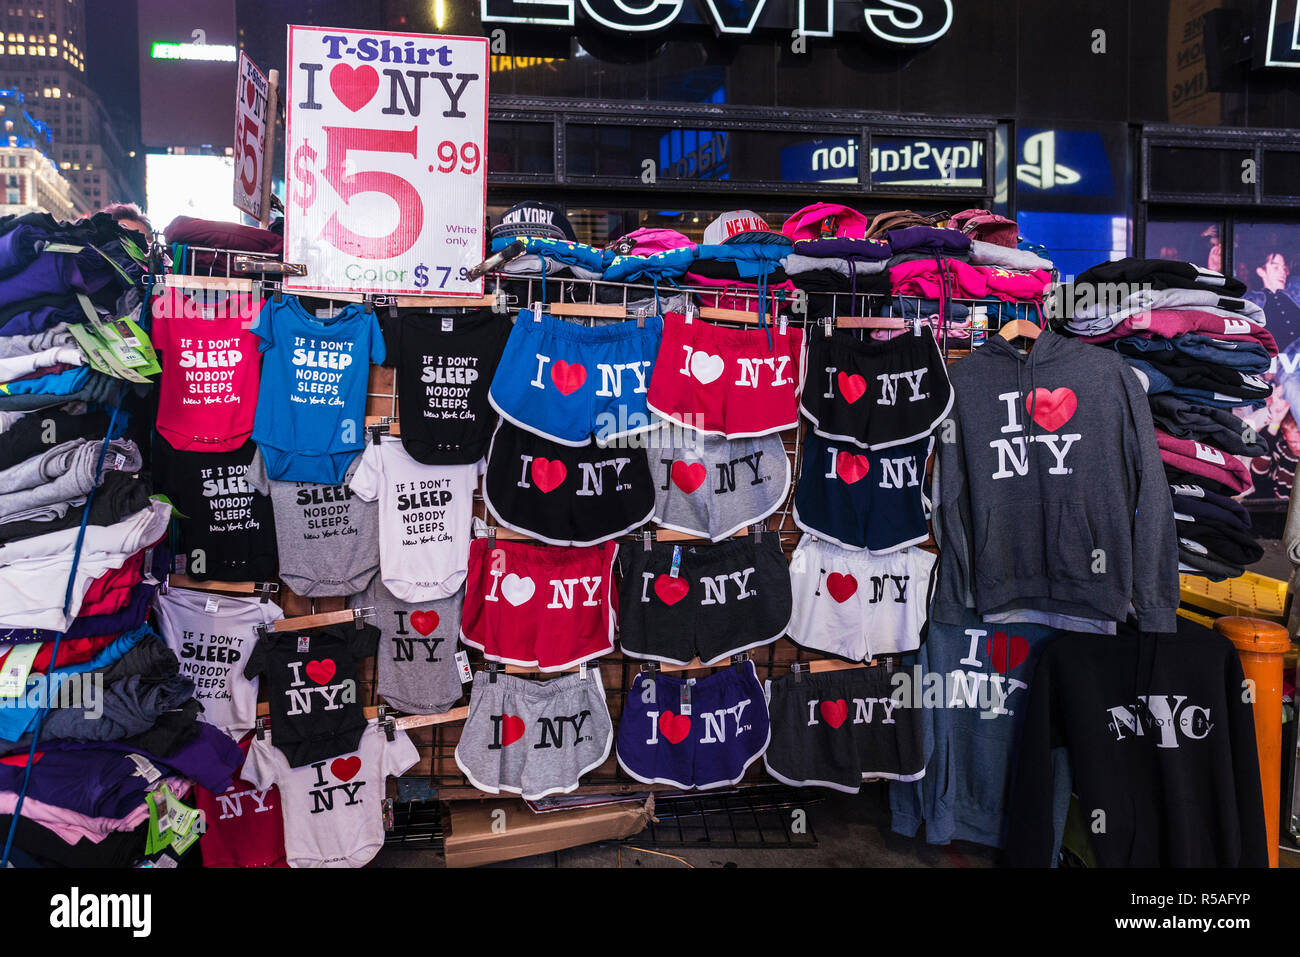 New York City, USA - July 30, 2018: Souvenir shop with T-shirts with the logo of I love NY on Times Square at night with large advertising screens in  Stock Photo